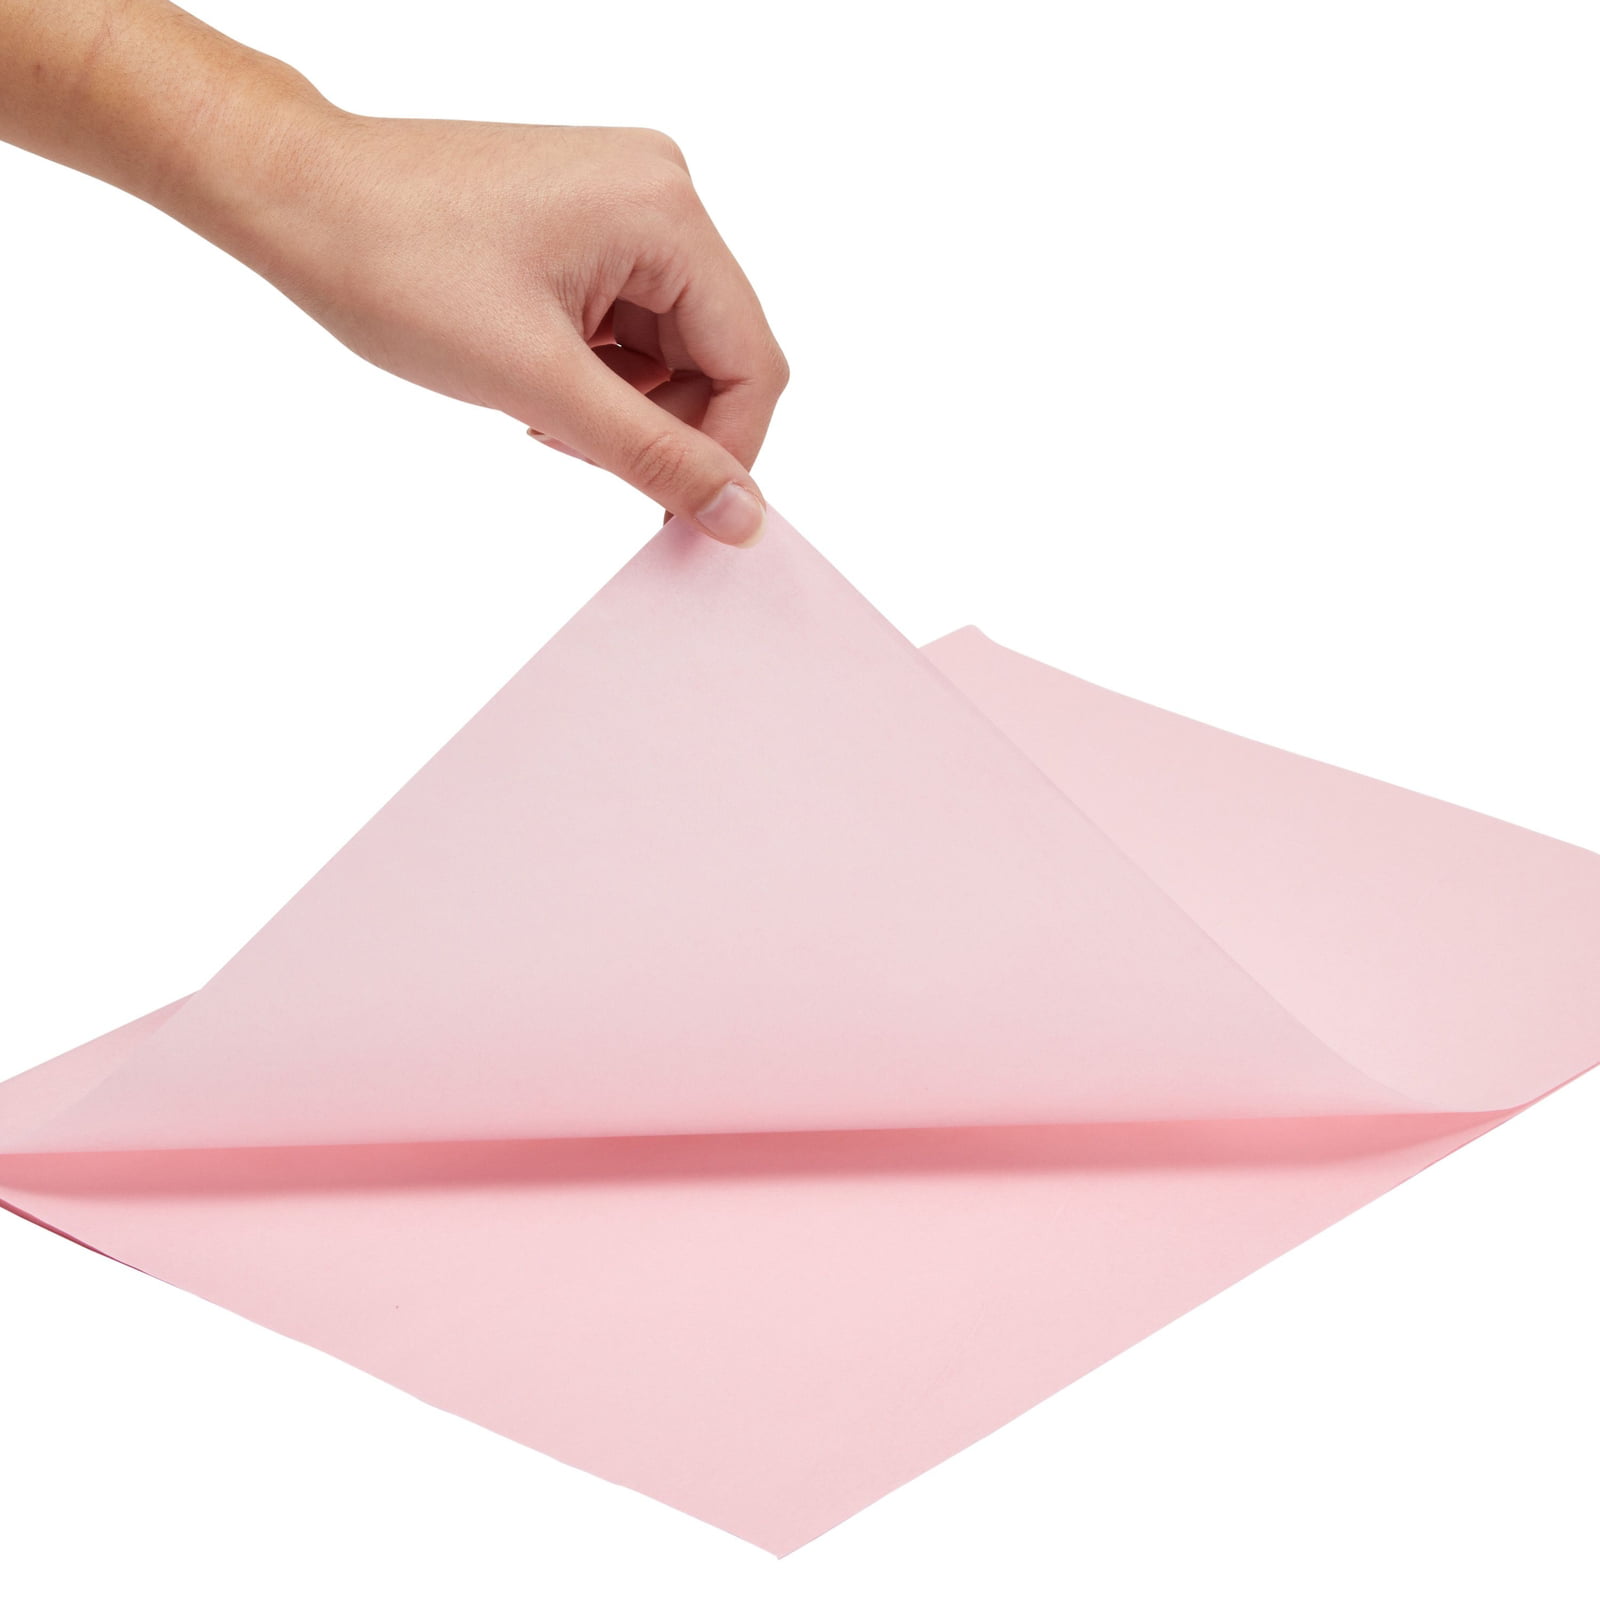  Blush Light Pink Tissue Paper 15 X 20 - 96 Sheet Pack preimum  Quality Tissue Paper Made in USA : Health & Household